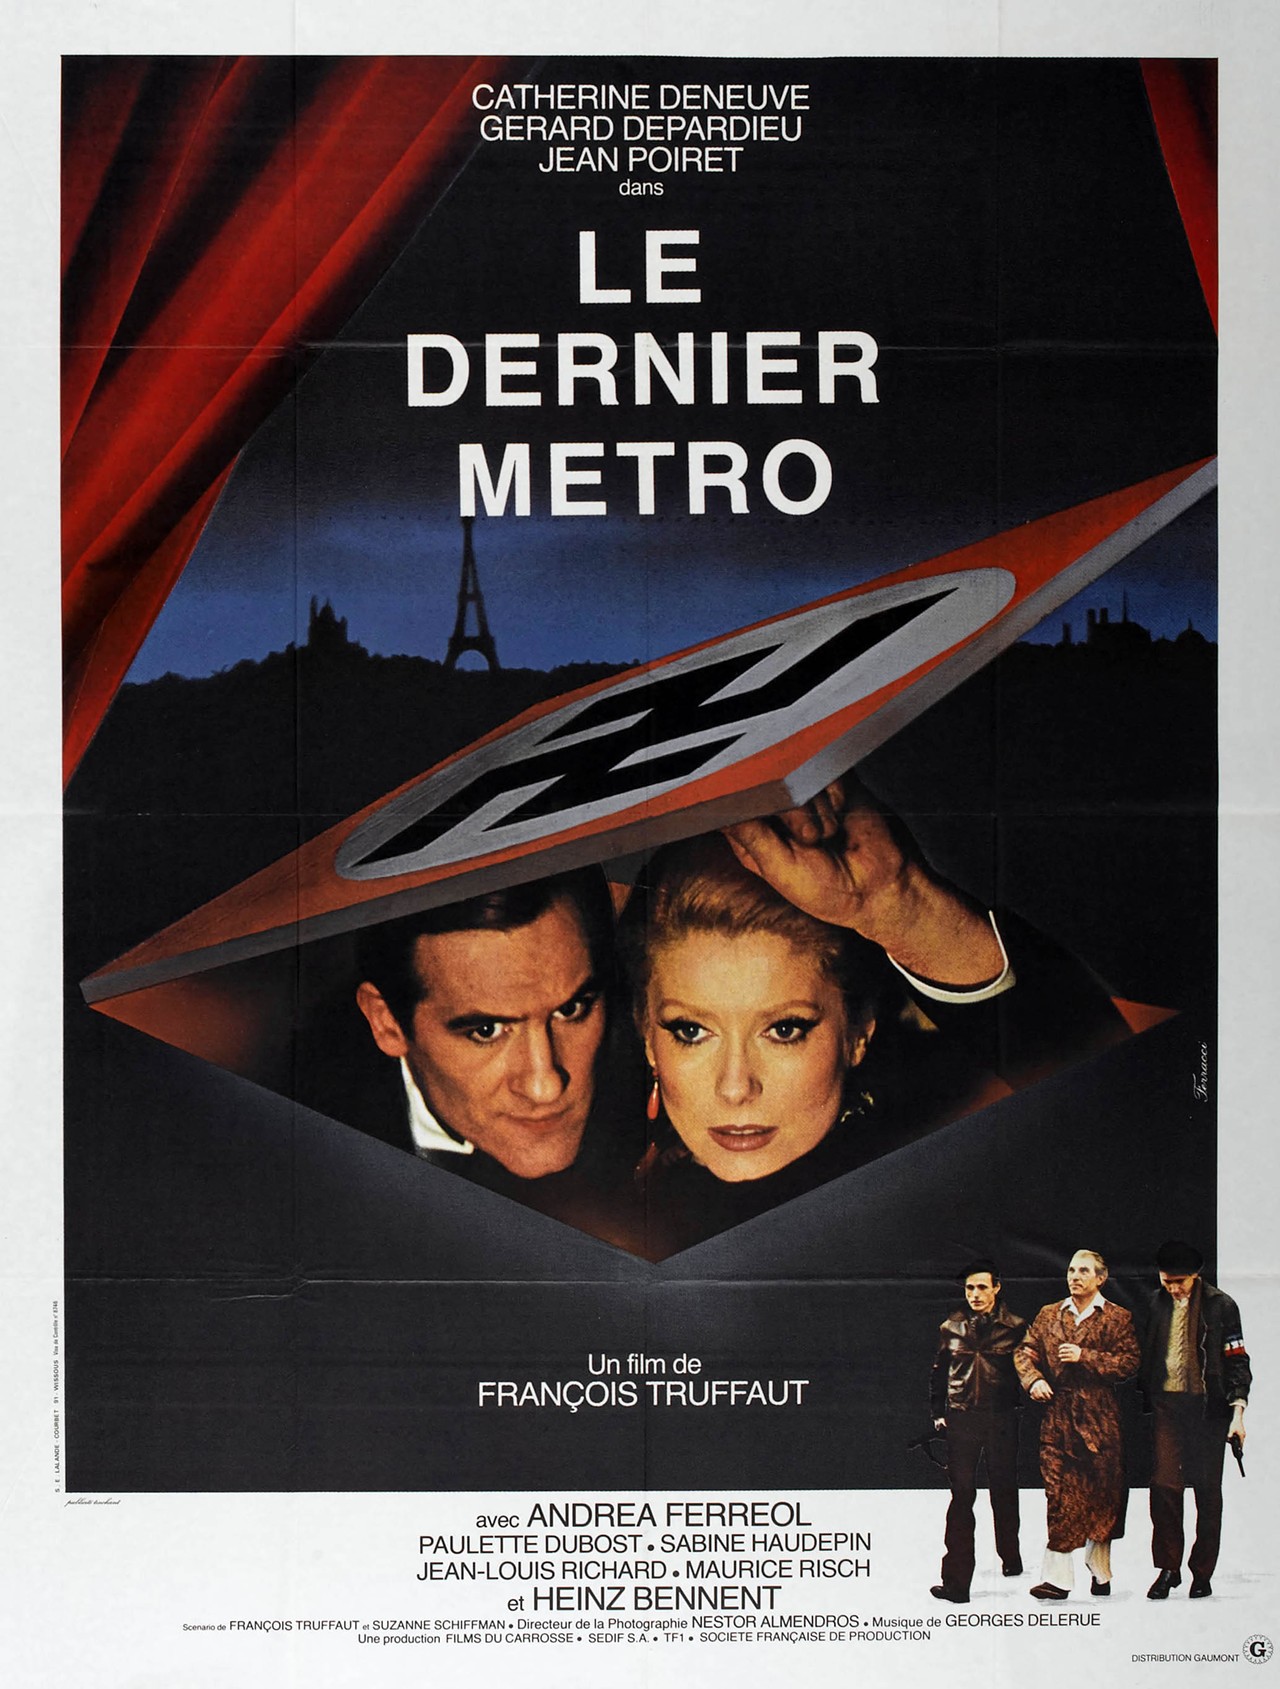 The Last Metro
Sun., Feb. 14
French New Wave master Fran&ccedil;ois Truffaut made some incredible movies before his death in 1984. Today at 1:30 p.m., the Cleveland Museum of Art screens The Last Metro, a film that stars Catherine Deneuve and G&eacute;rard Depardieu. Winner of 10 C&eacute;sars (French Oscars), including Best Film, Actress, Actor, and Director, the period piece is set in German-occupied Paris during World War II. It centers on a French stage actress (Deneuve) who must maintain and preserve her Jewish husband&#146;s theater while he is &#147;away. Tickets are $10. (Niesel)